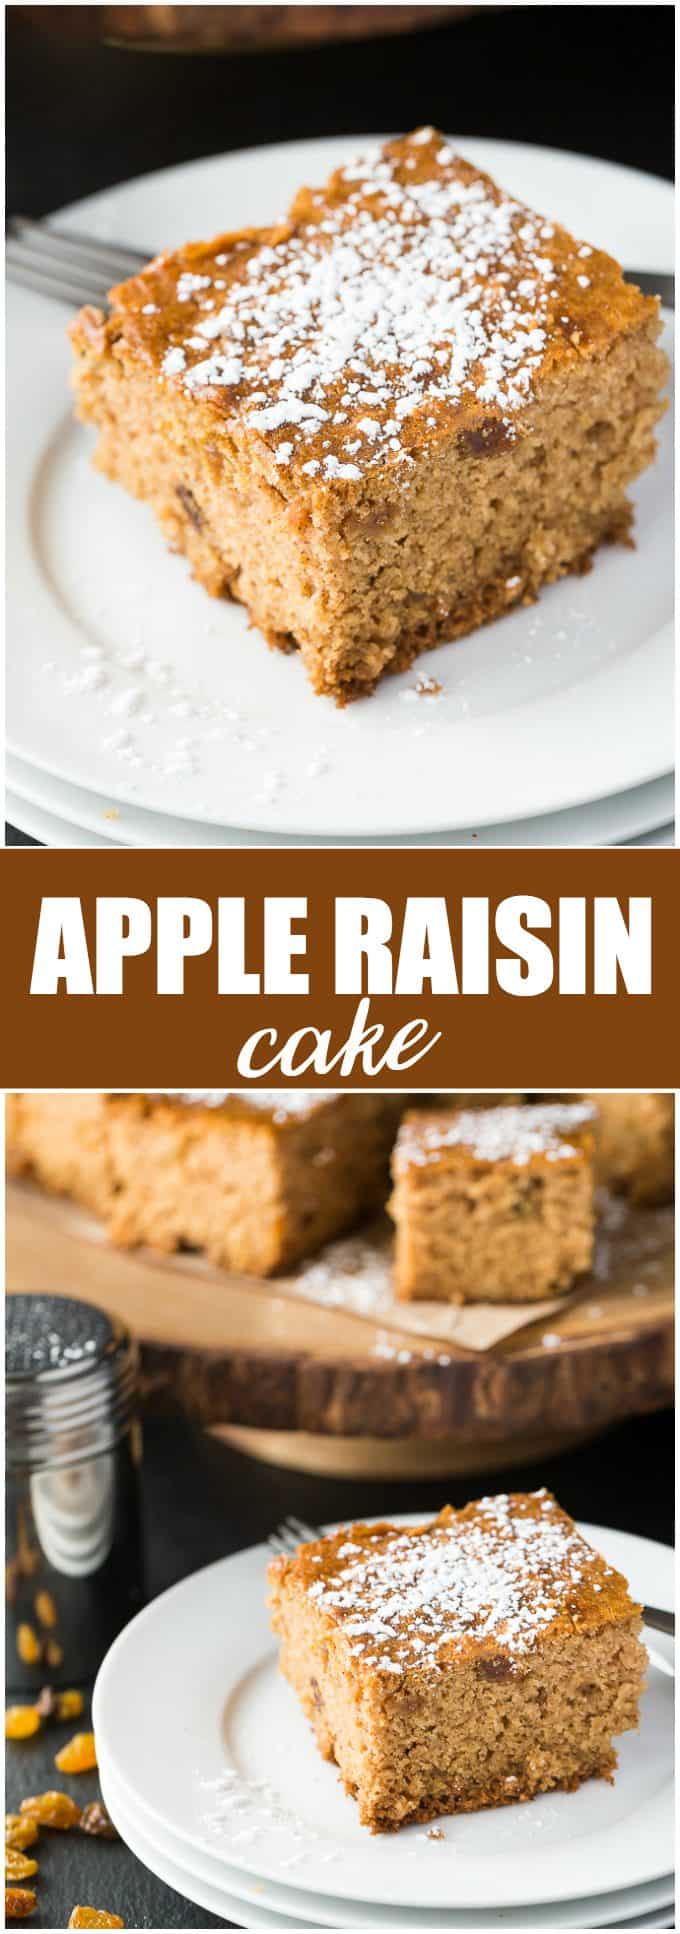 Apple Raisin Cake - This is the kind of cake I'd eat for breakfast! It tastes a little bit like a raisin bran muffin, but in a cake form. It's easy to make and so, so good!